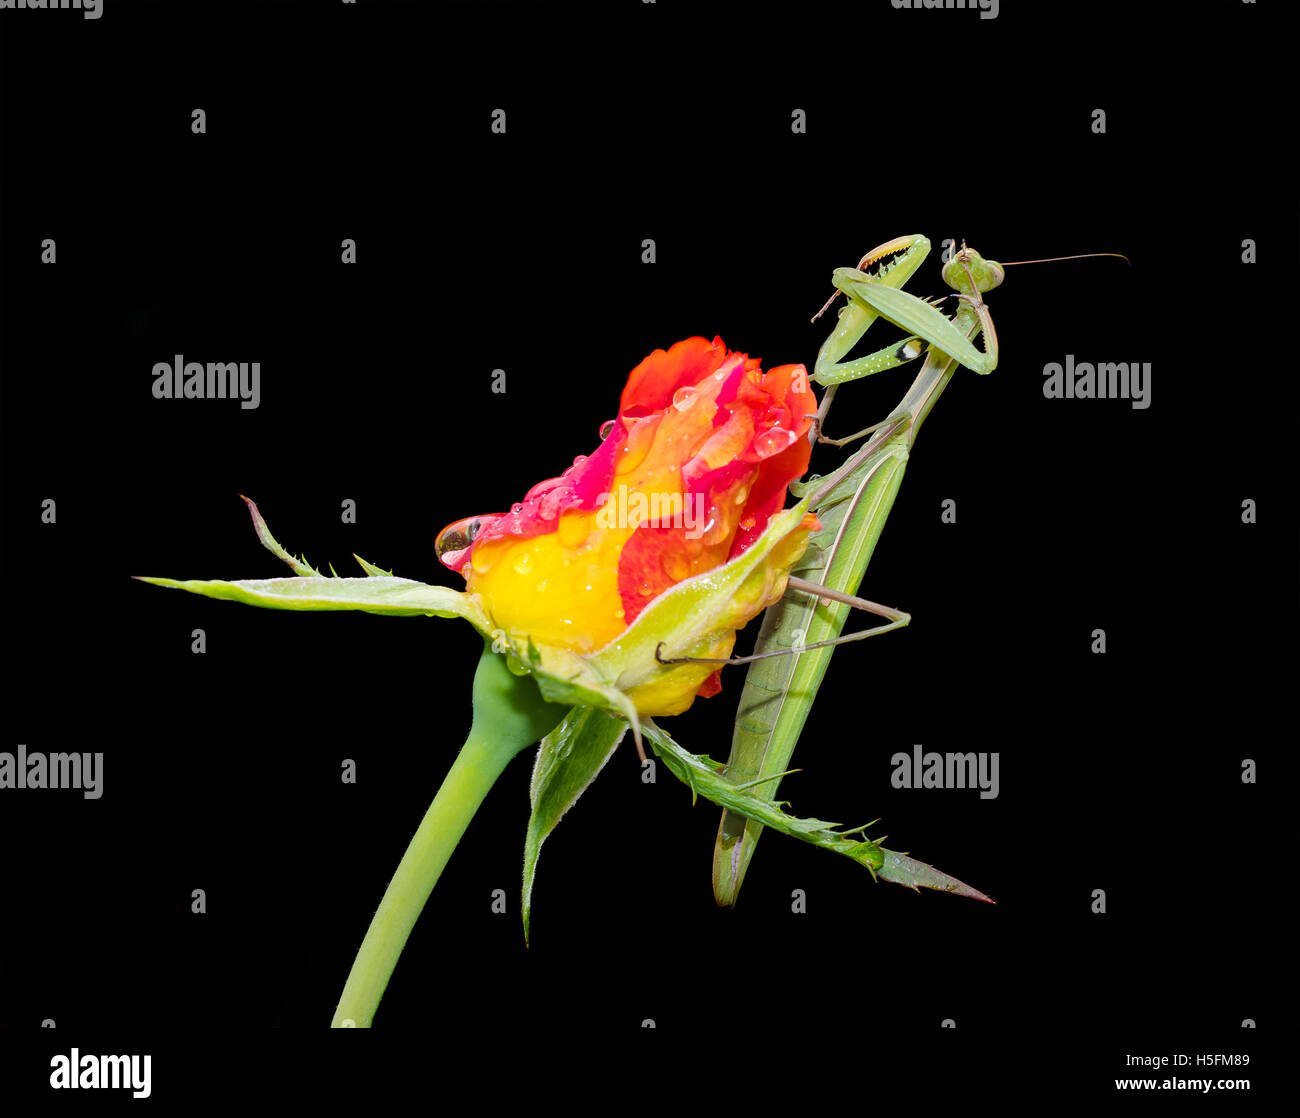 Green Praying Mantis, Mantis religiosa, sitting on a rosebud isolated on black, cleaning its legs from water droplets. Stock Photo